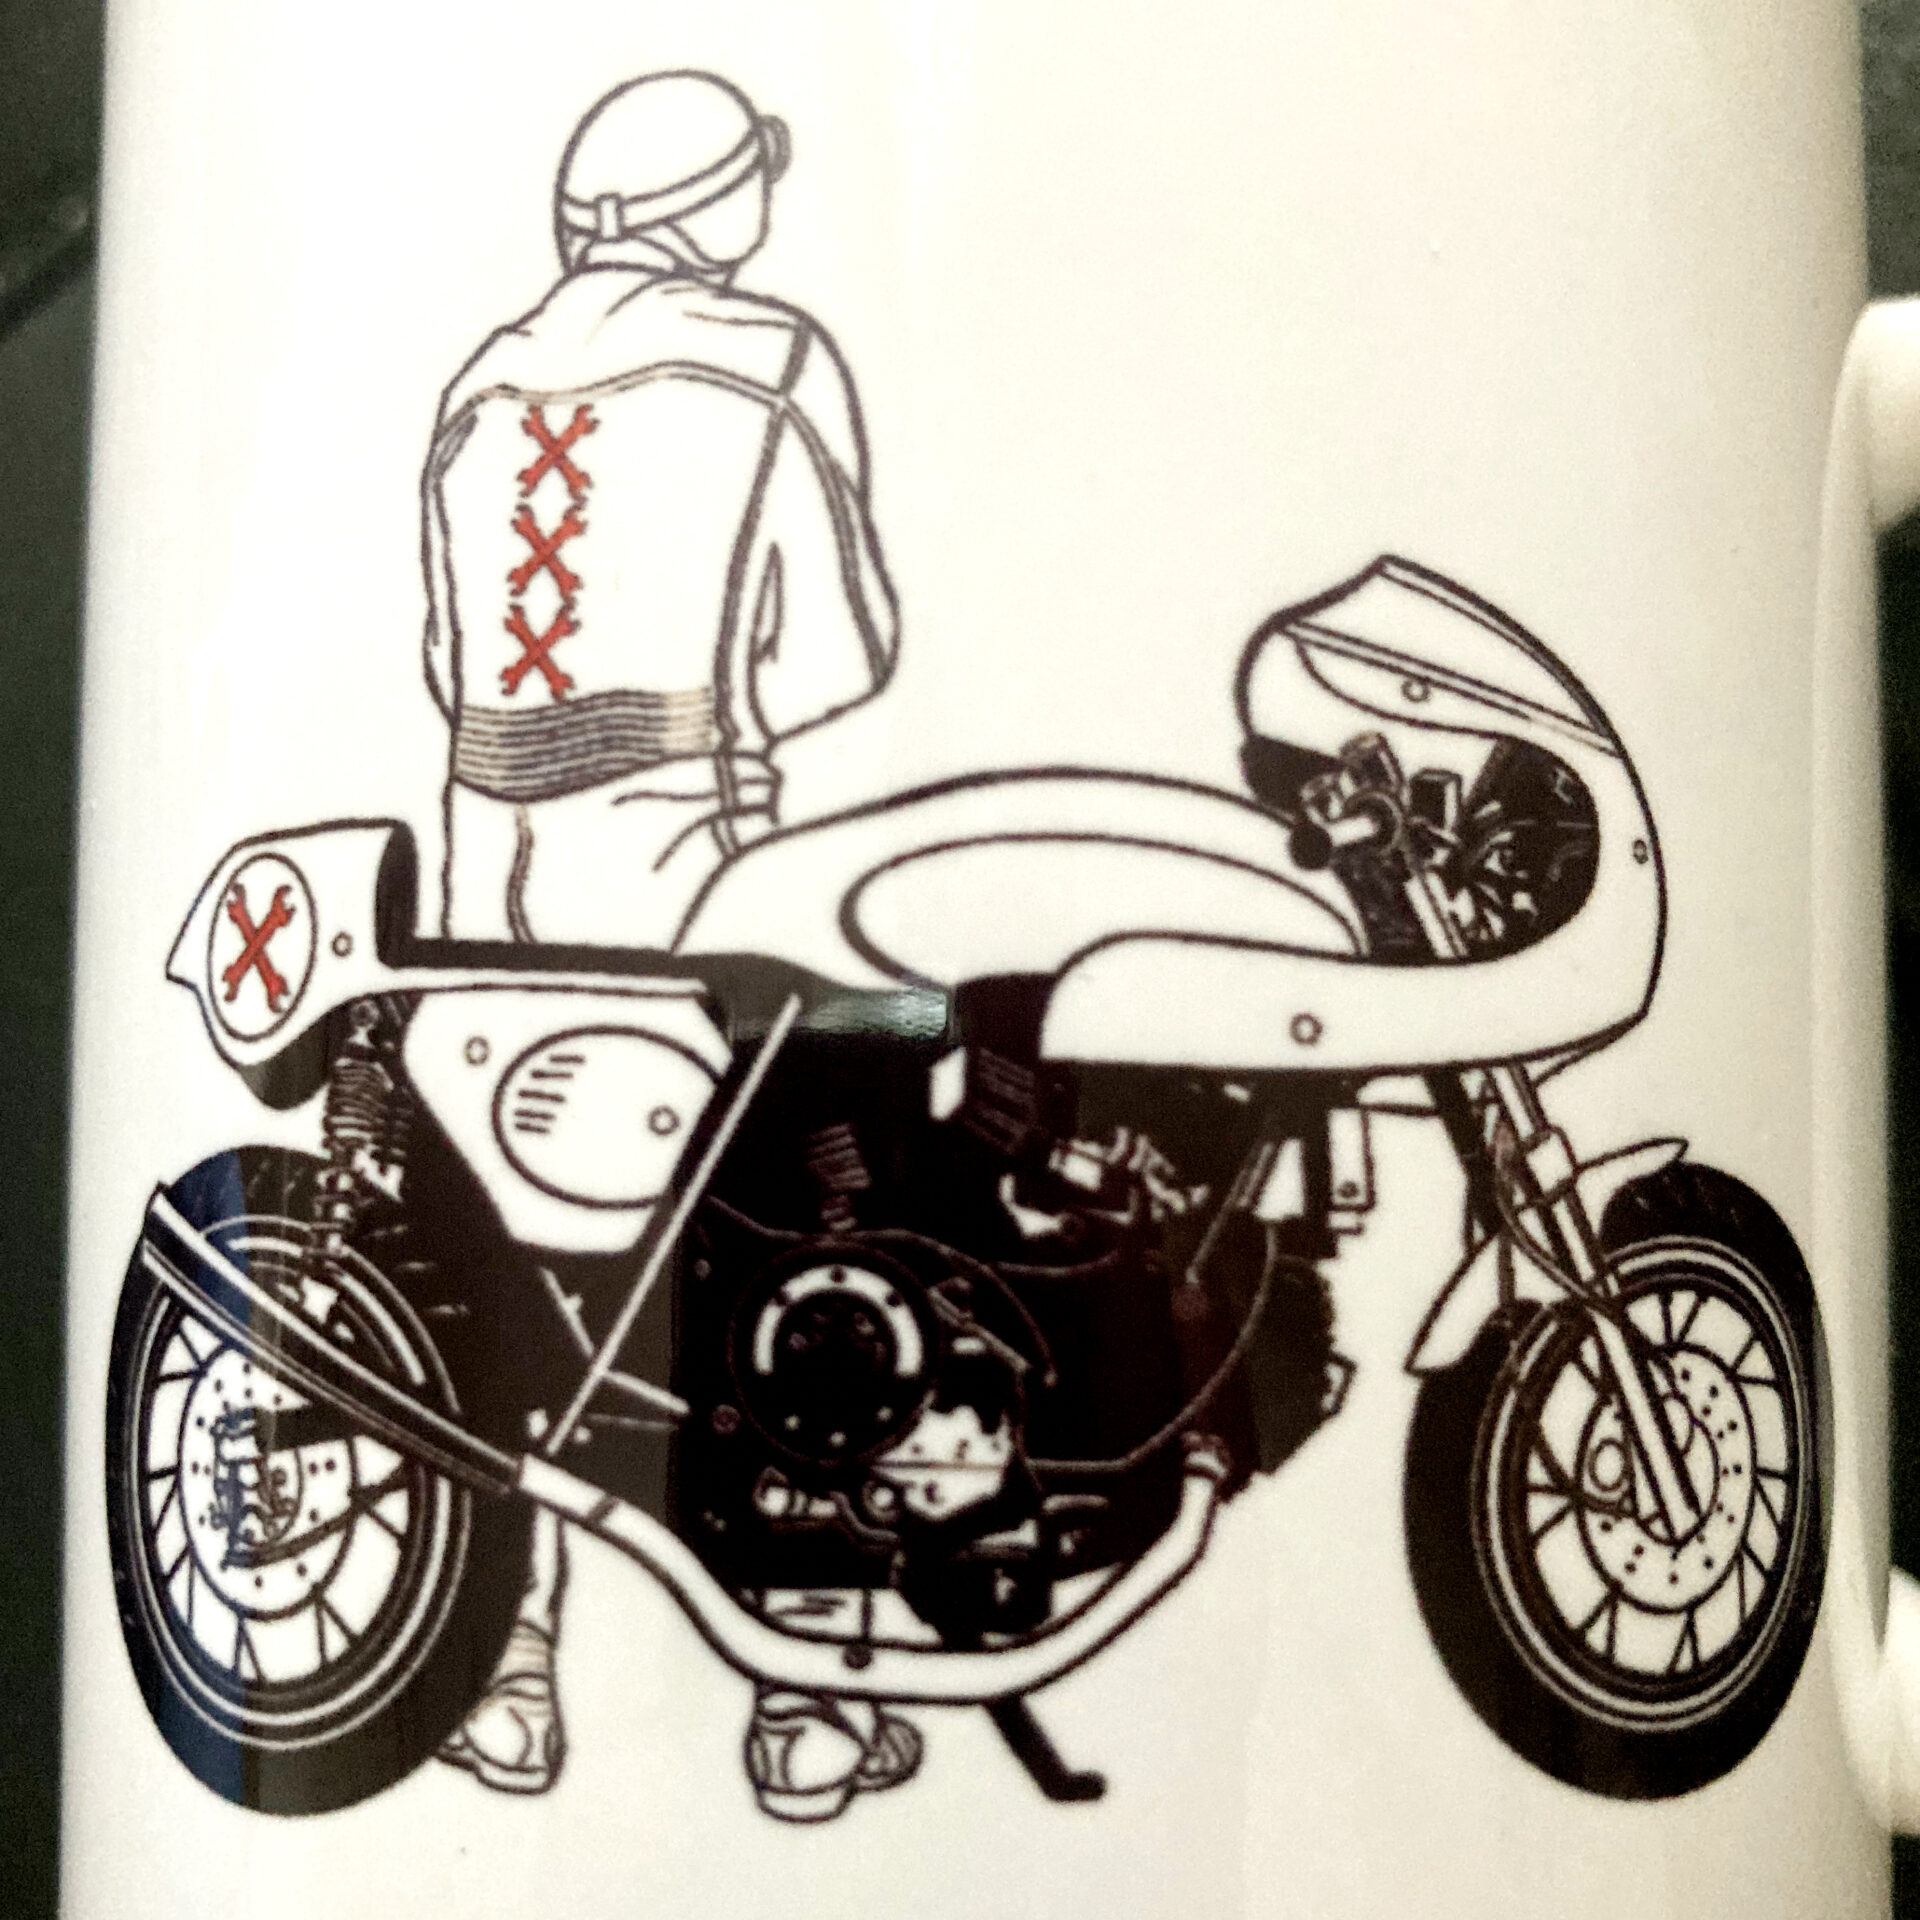 Caferacer Mug – make your cup of coffee taste even better